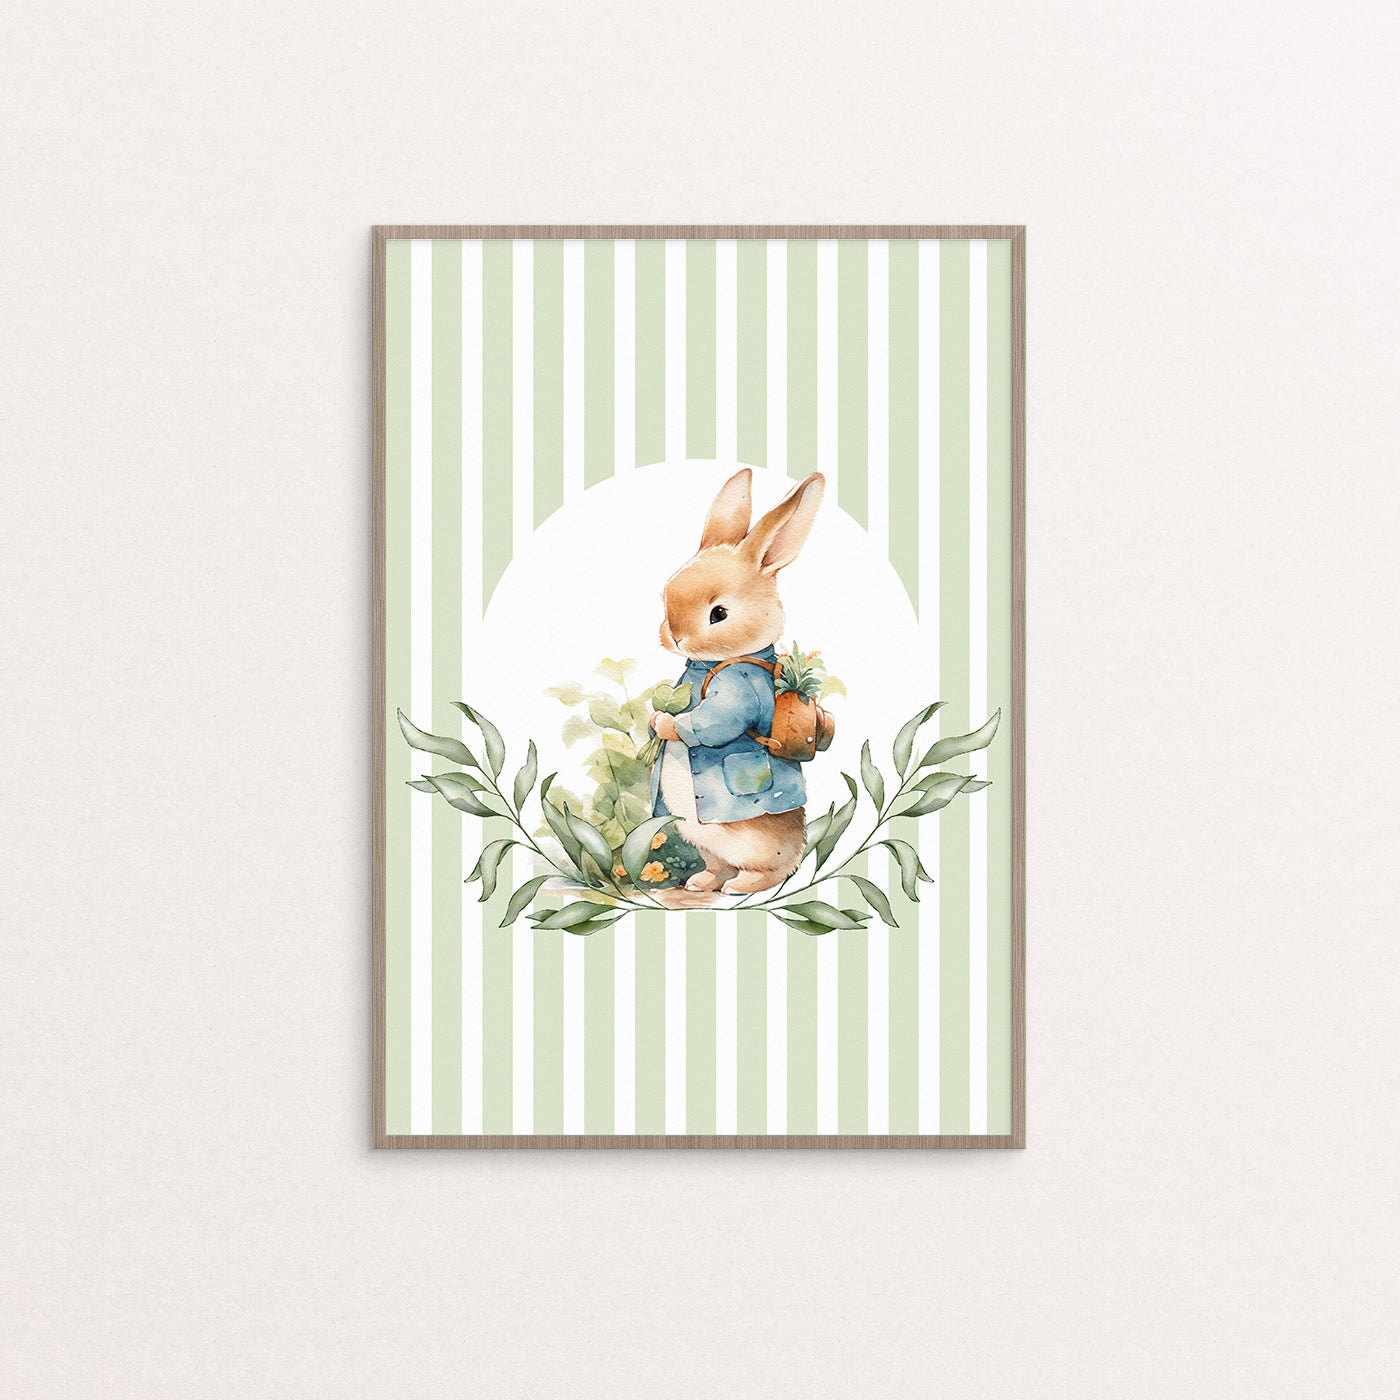 Little bunny picking herbs